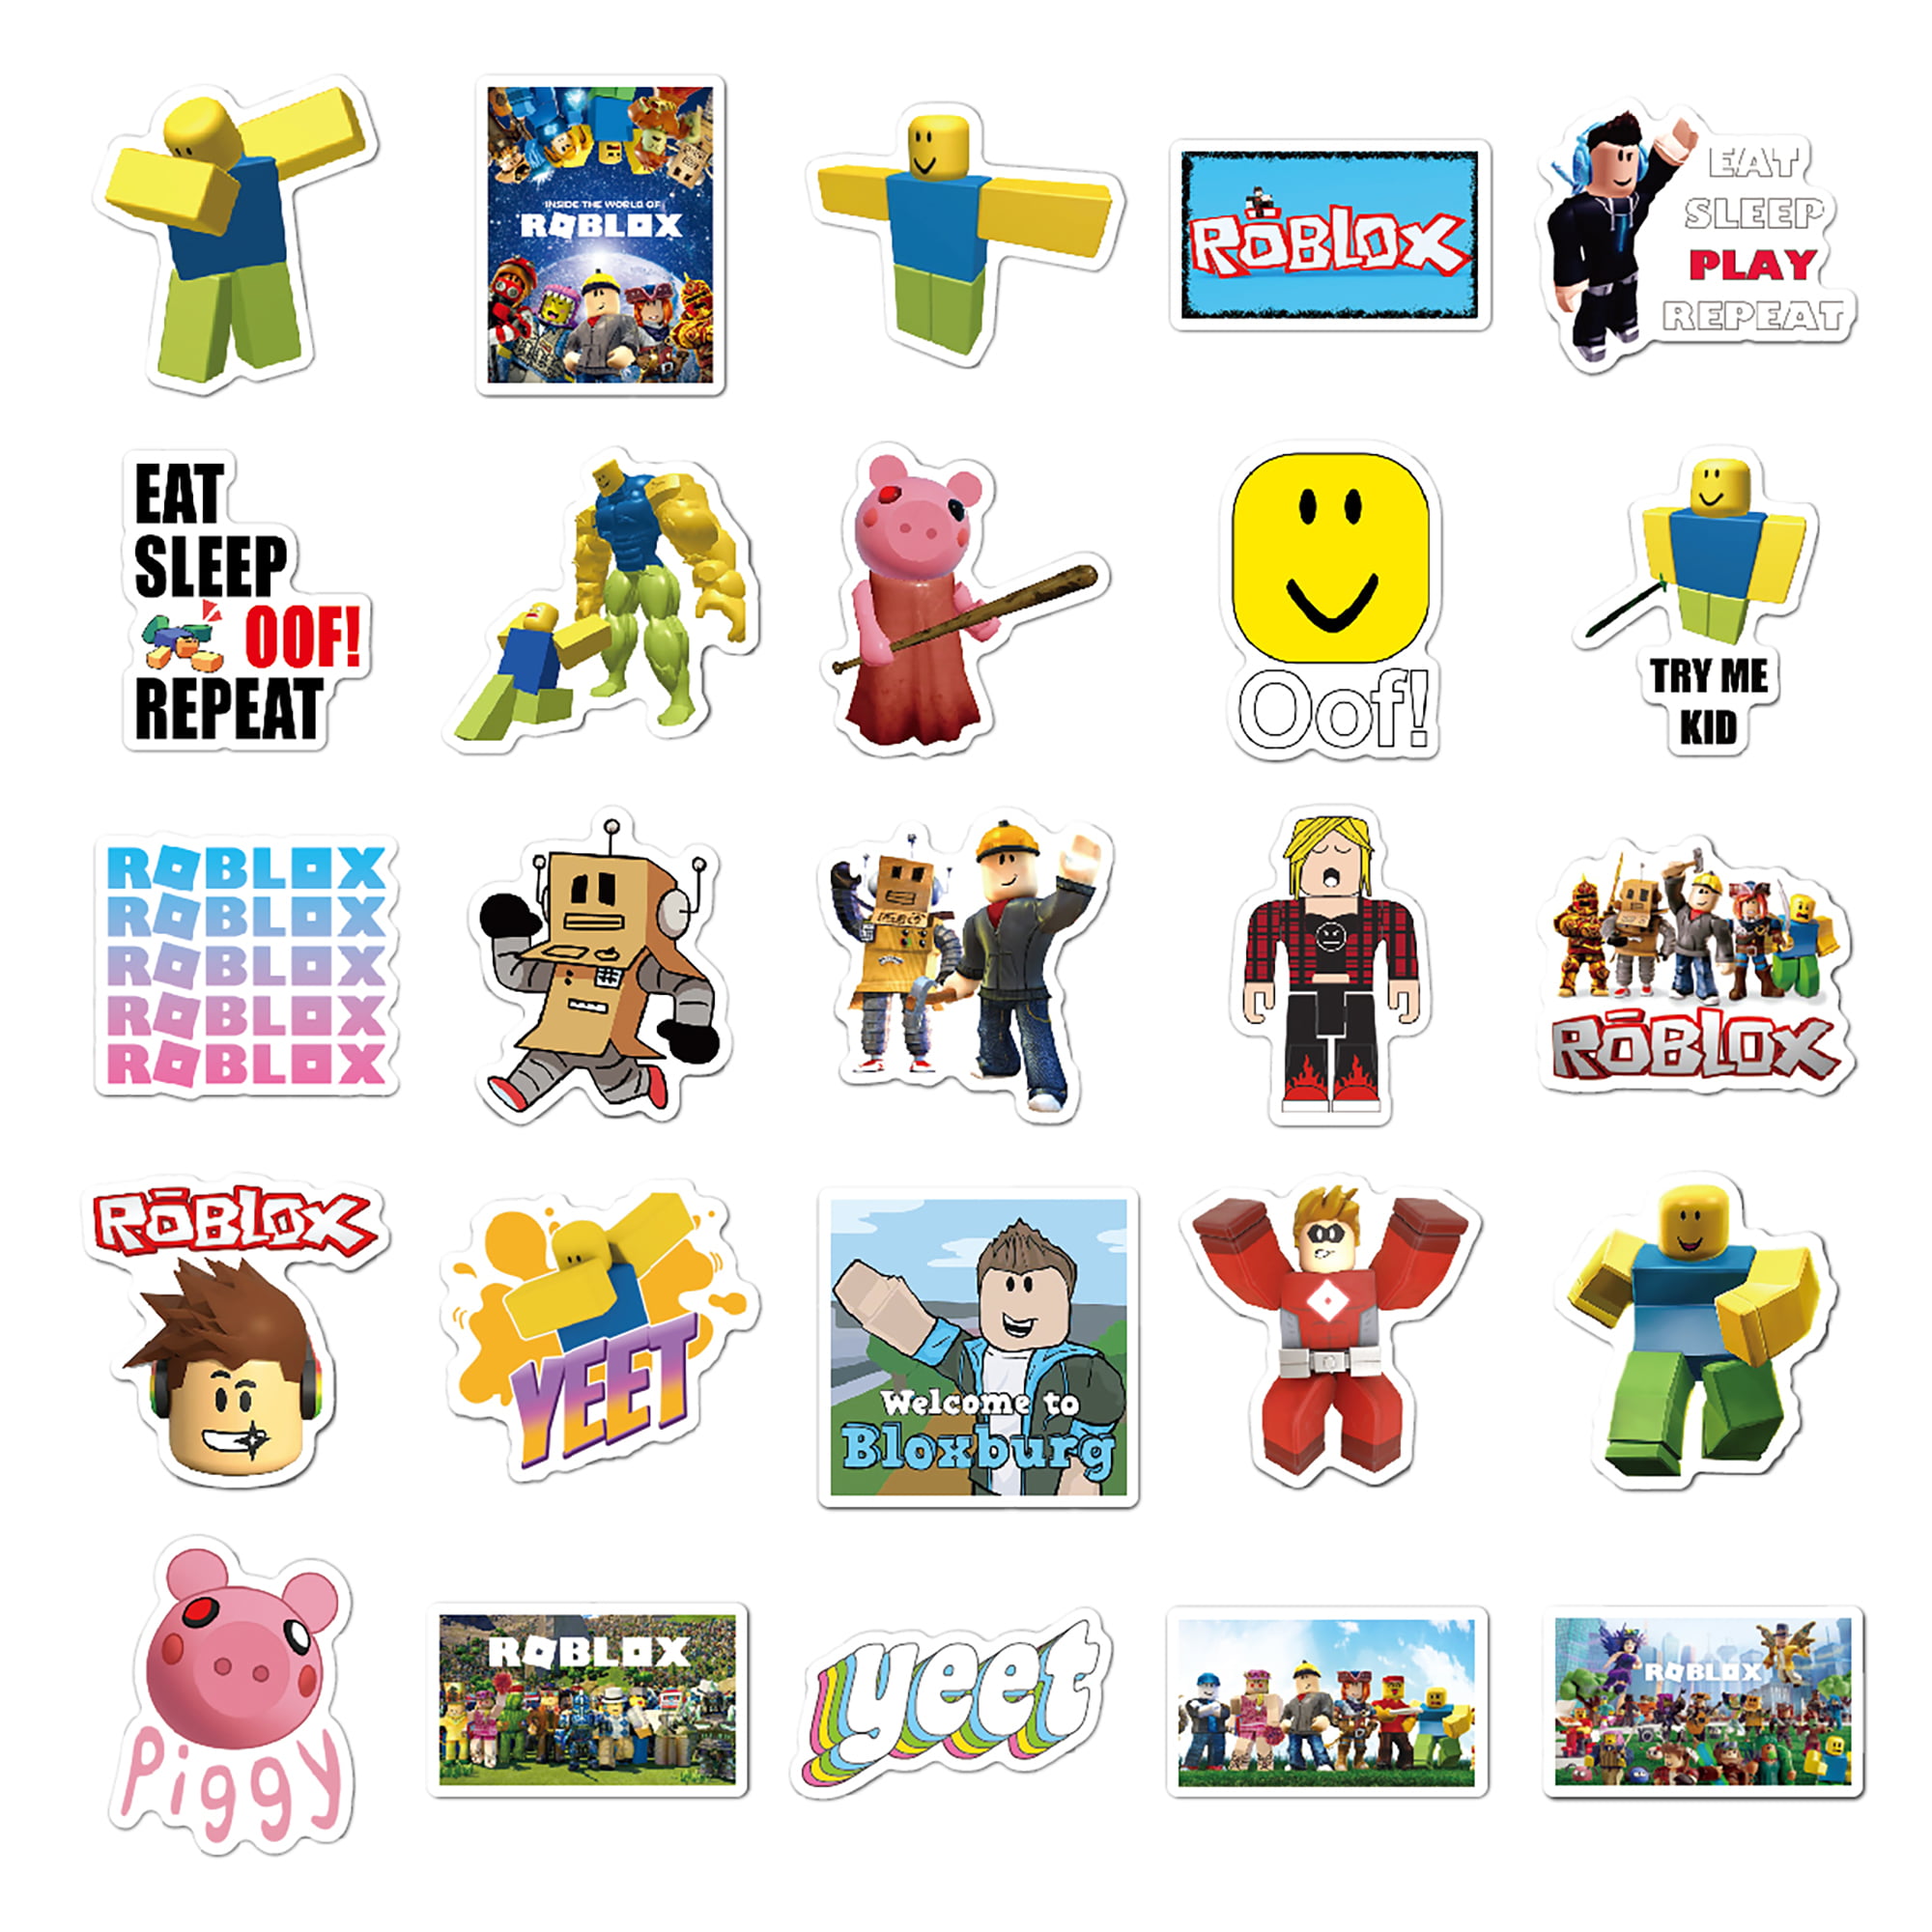 Roblox Sticker Pack 100pcs Sticker Decals Best Gift For Kids Children Teens Waterproof Online Gaming Stickers Pack For Home Decor Phone Hydro Flasks Water Bottle Bicycle Skateboard Laptop Pads Luggage Walmart Com Walmart Com - roblox flag decals